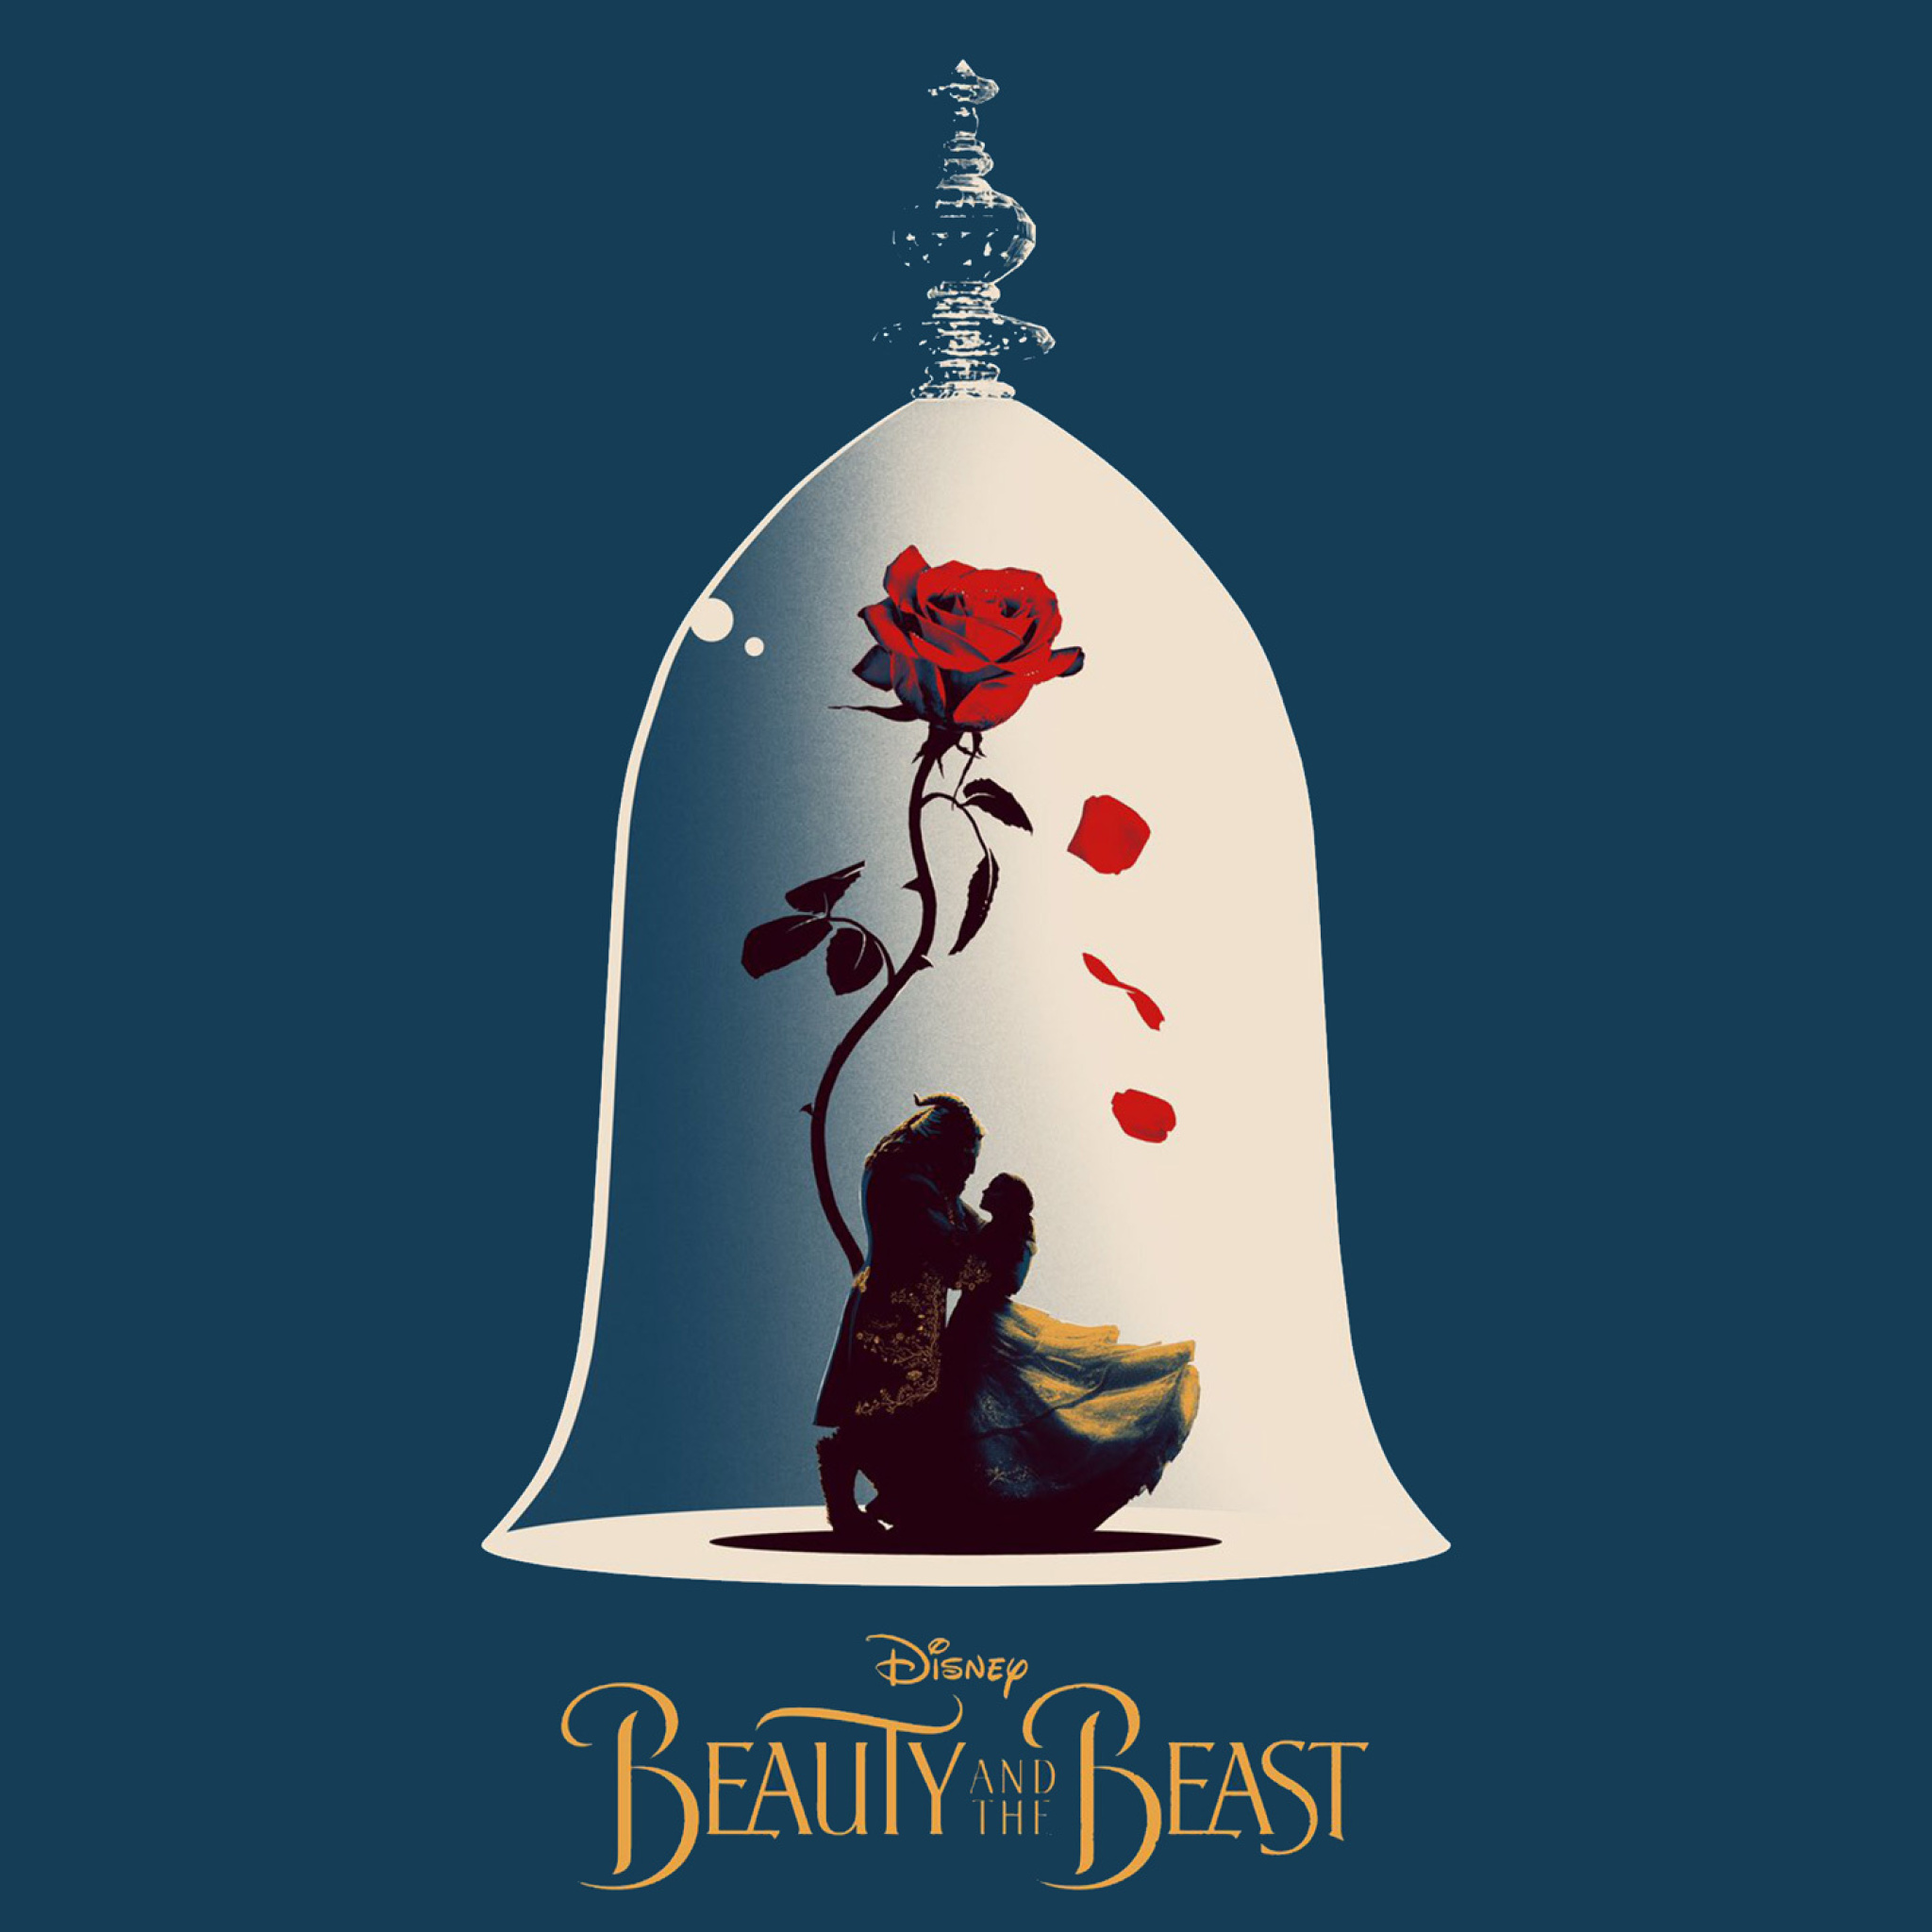 Beauty and the Beast Poster wallpaper 2048x2048